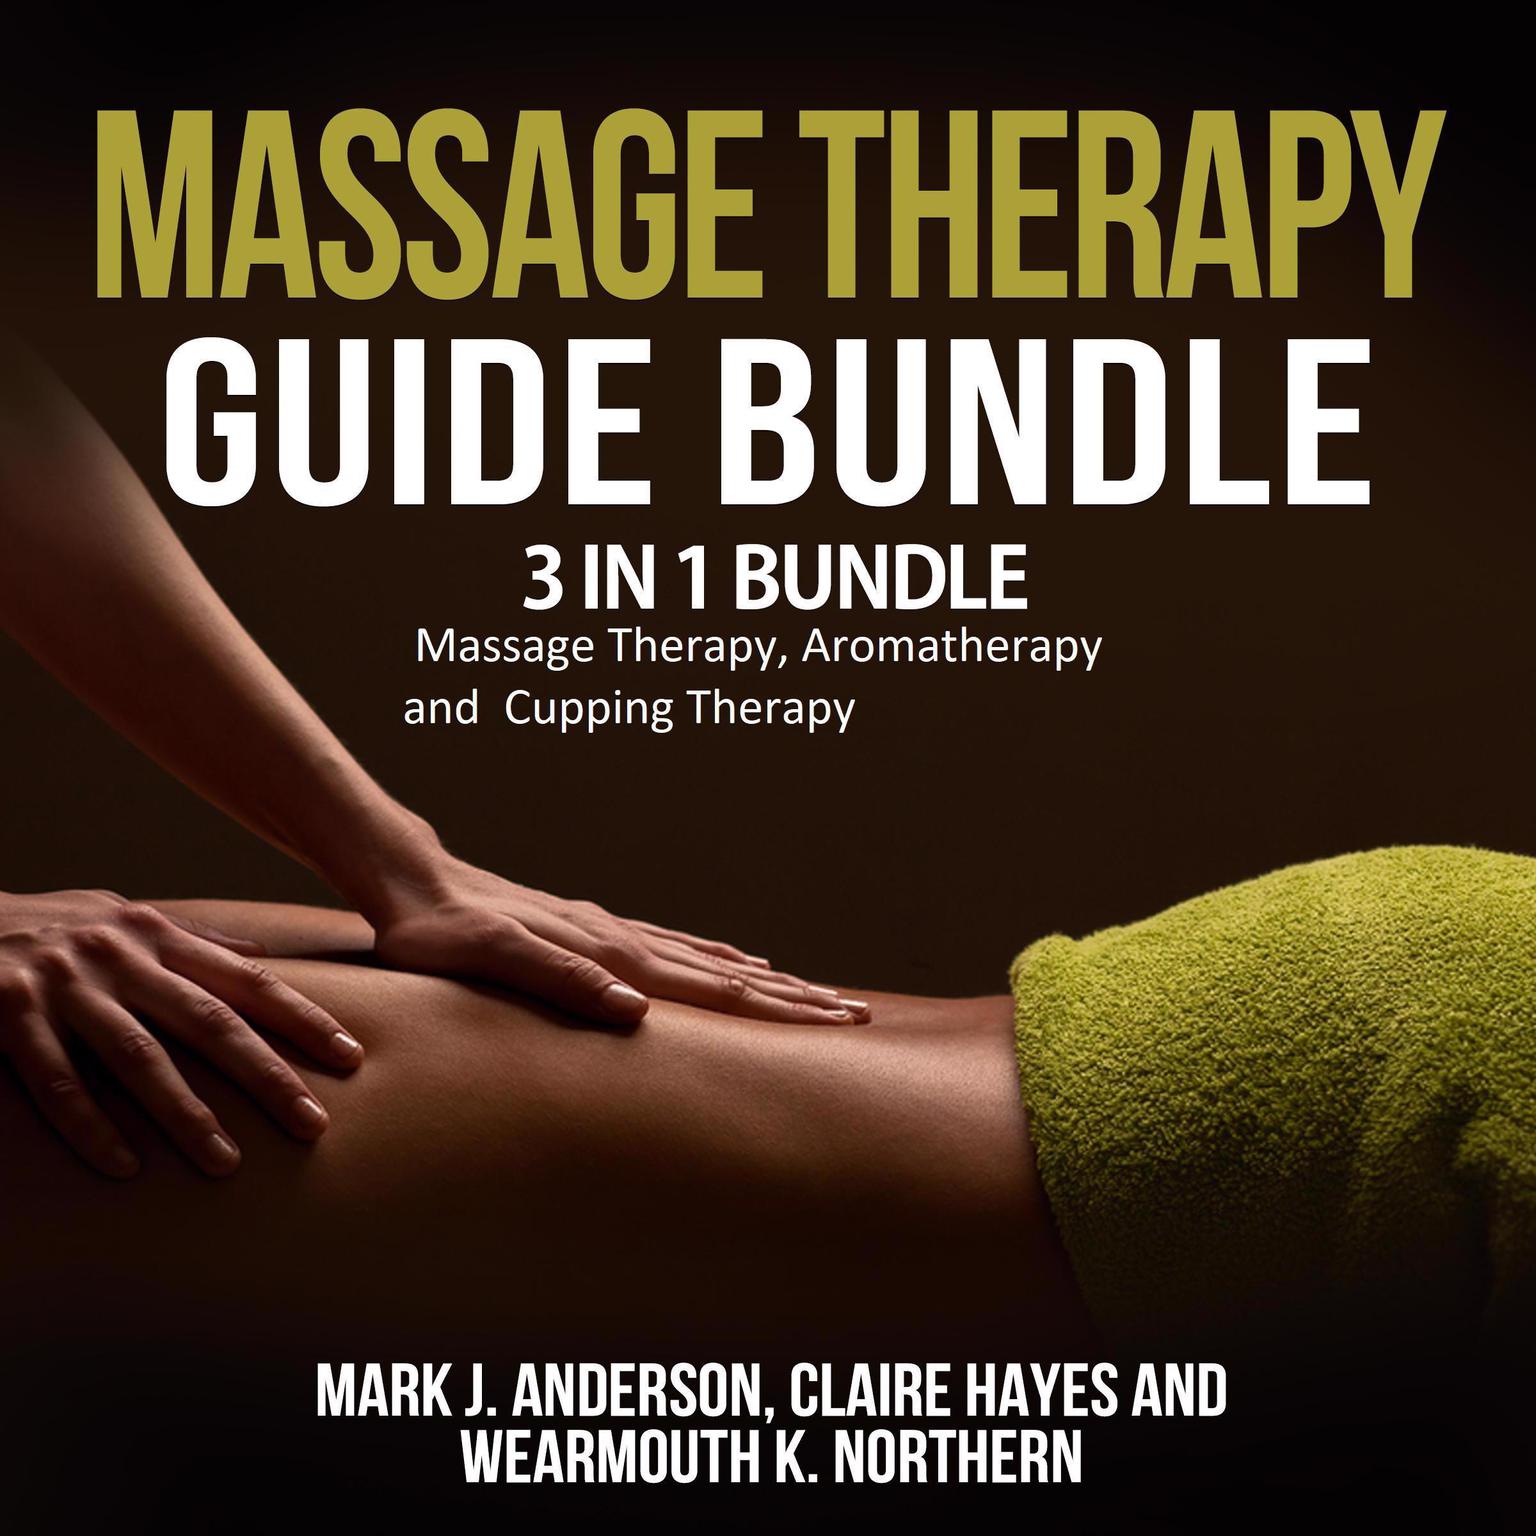 Massage Therapy Guide Bundle:: 3 in 1 Bundle, Massage Therapy, Aromatherapy, Cupping Therapy Audiobook, by Mark J. Anderson